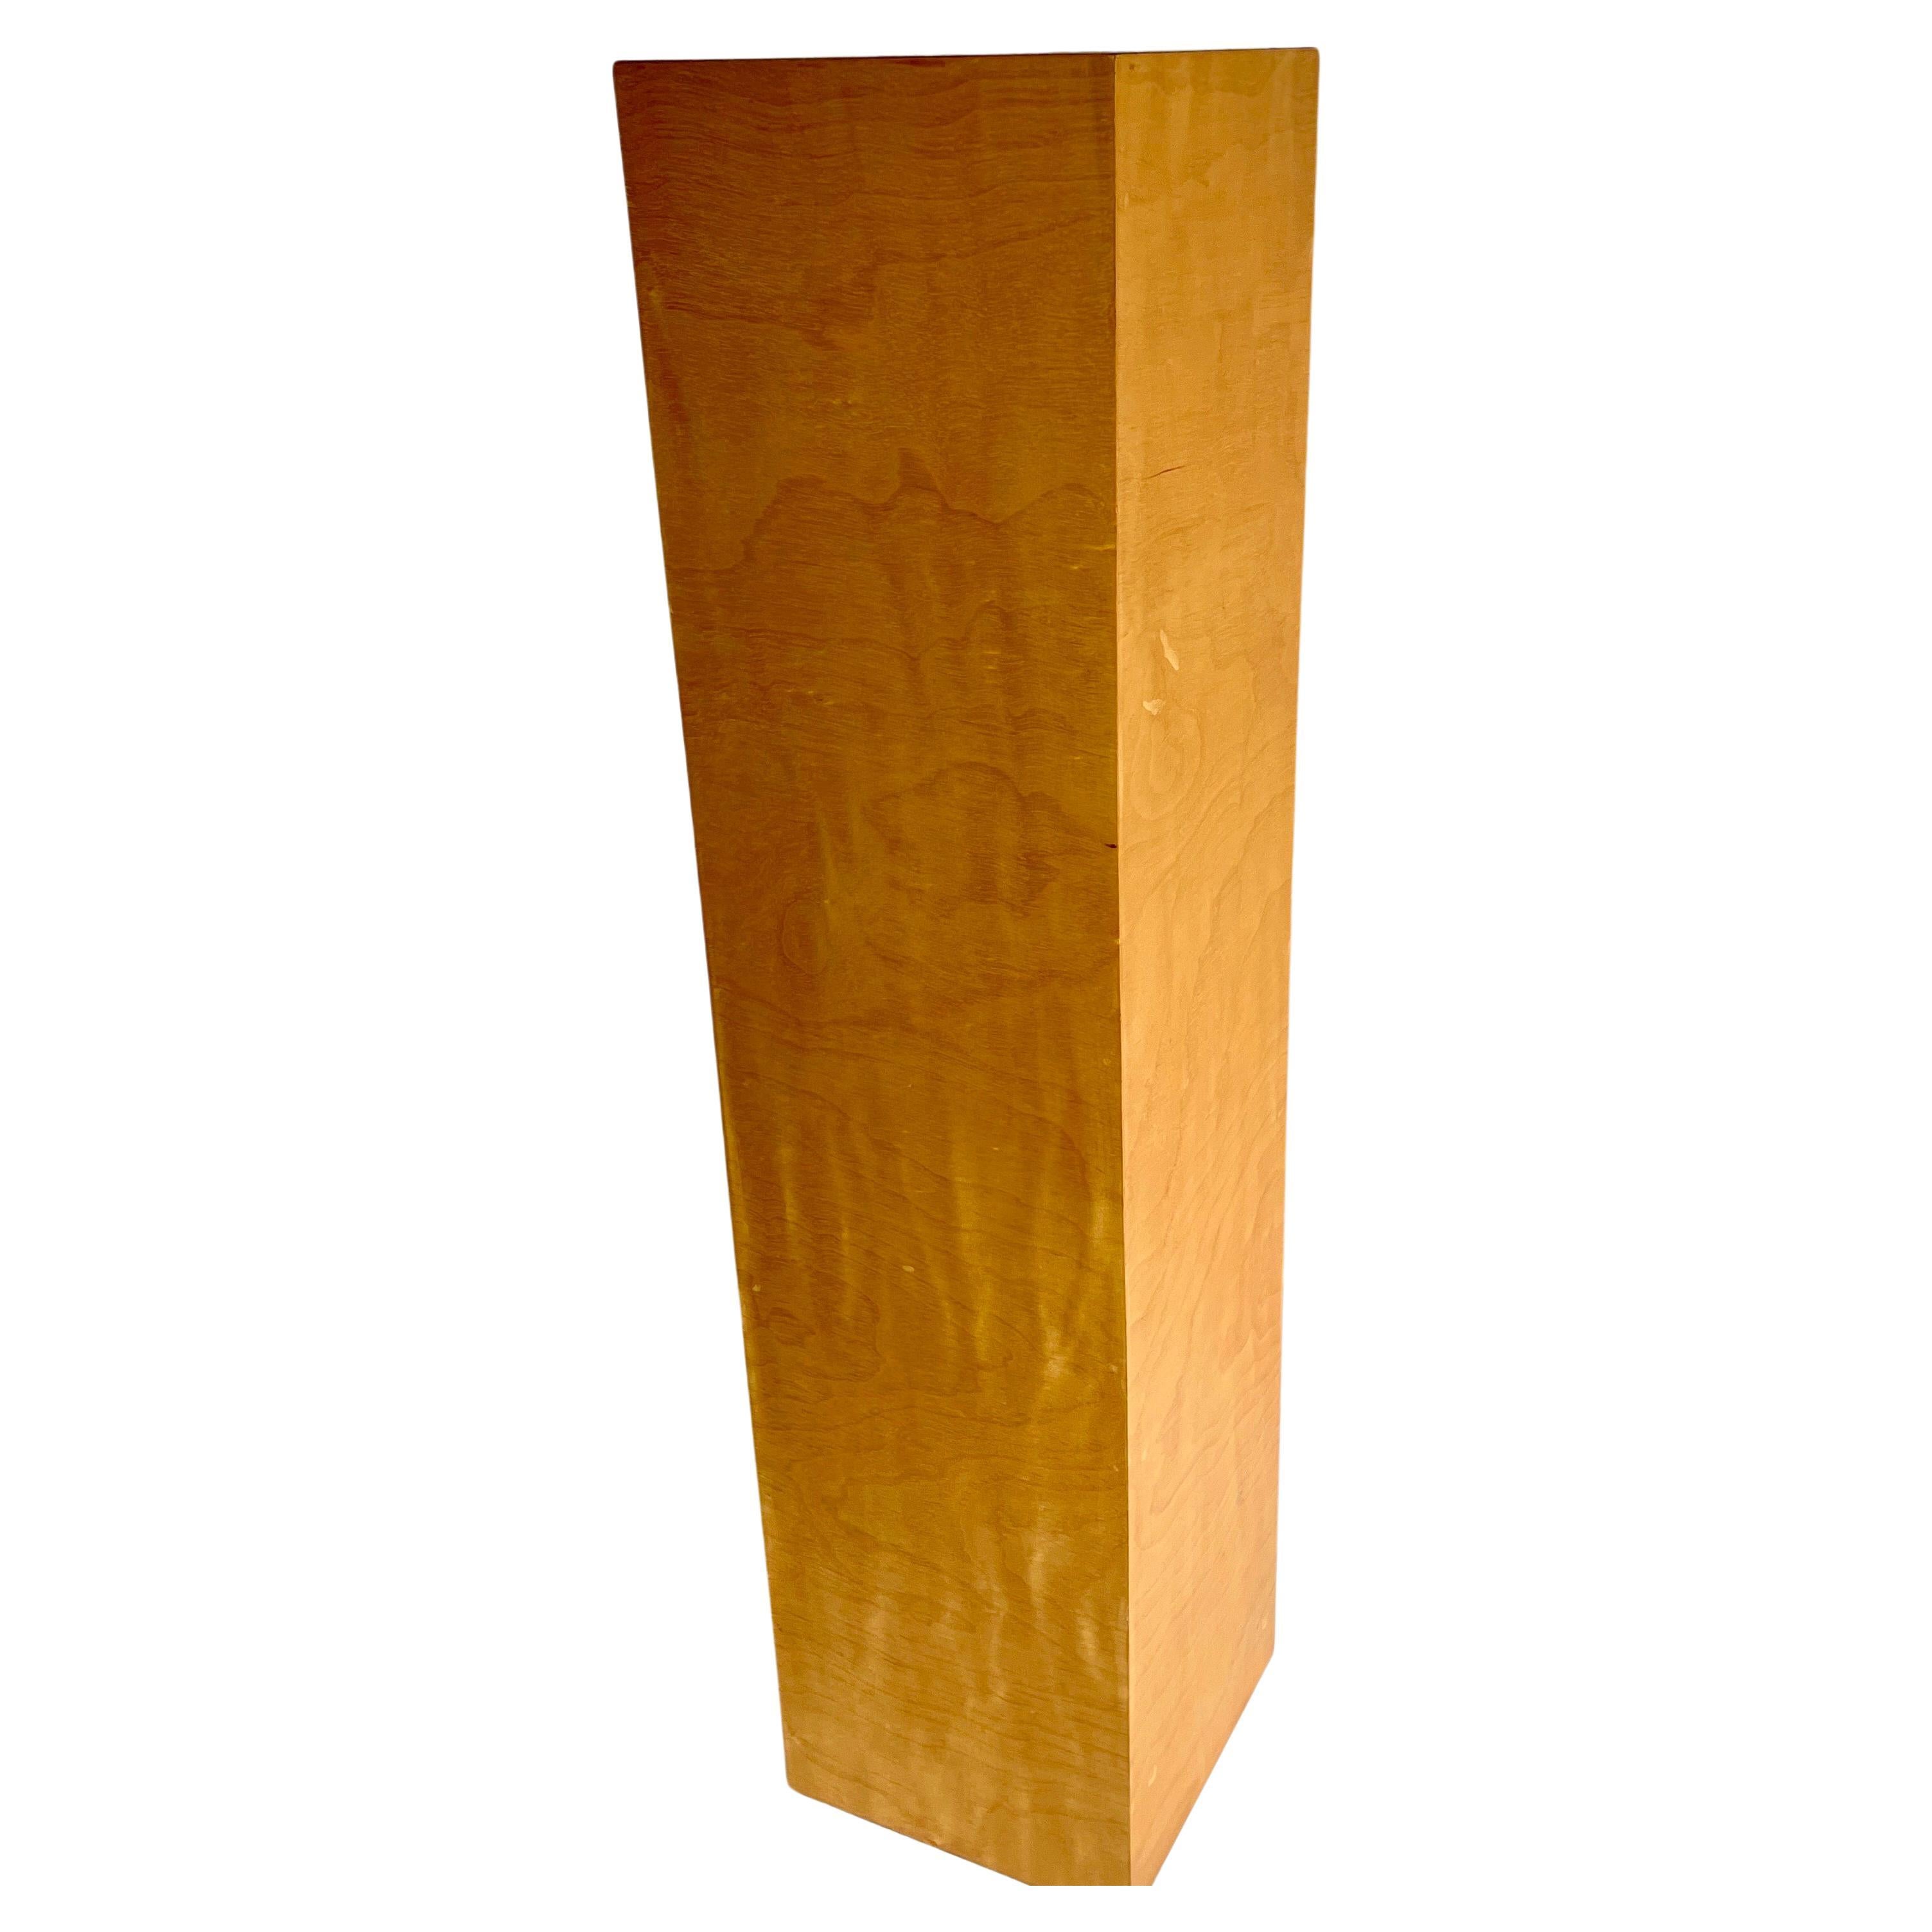 Late 20th Century Light Colored Veneer Wood Pedestal In Good Condition For Sale In Haddonfield, NJ